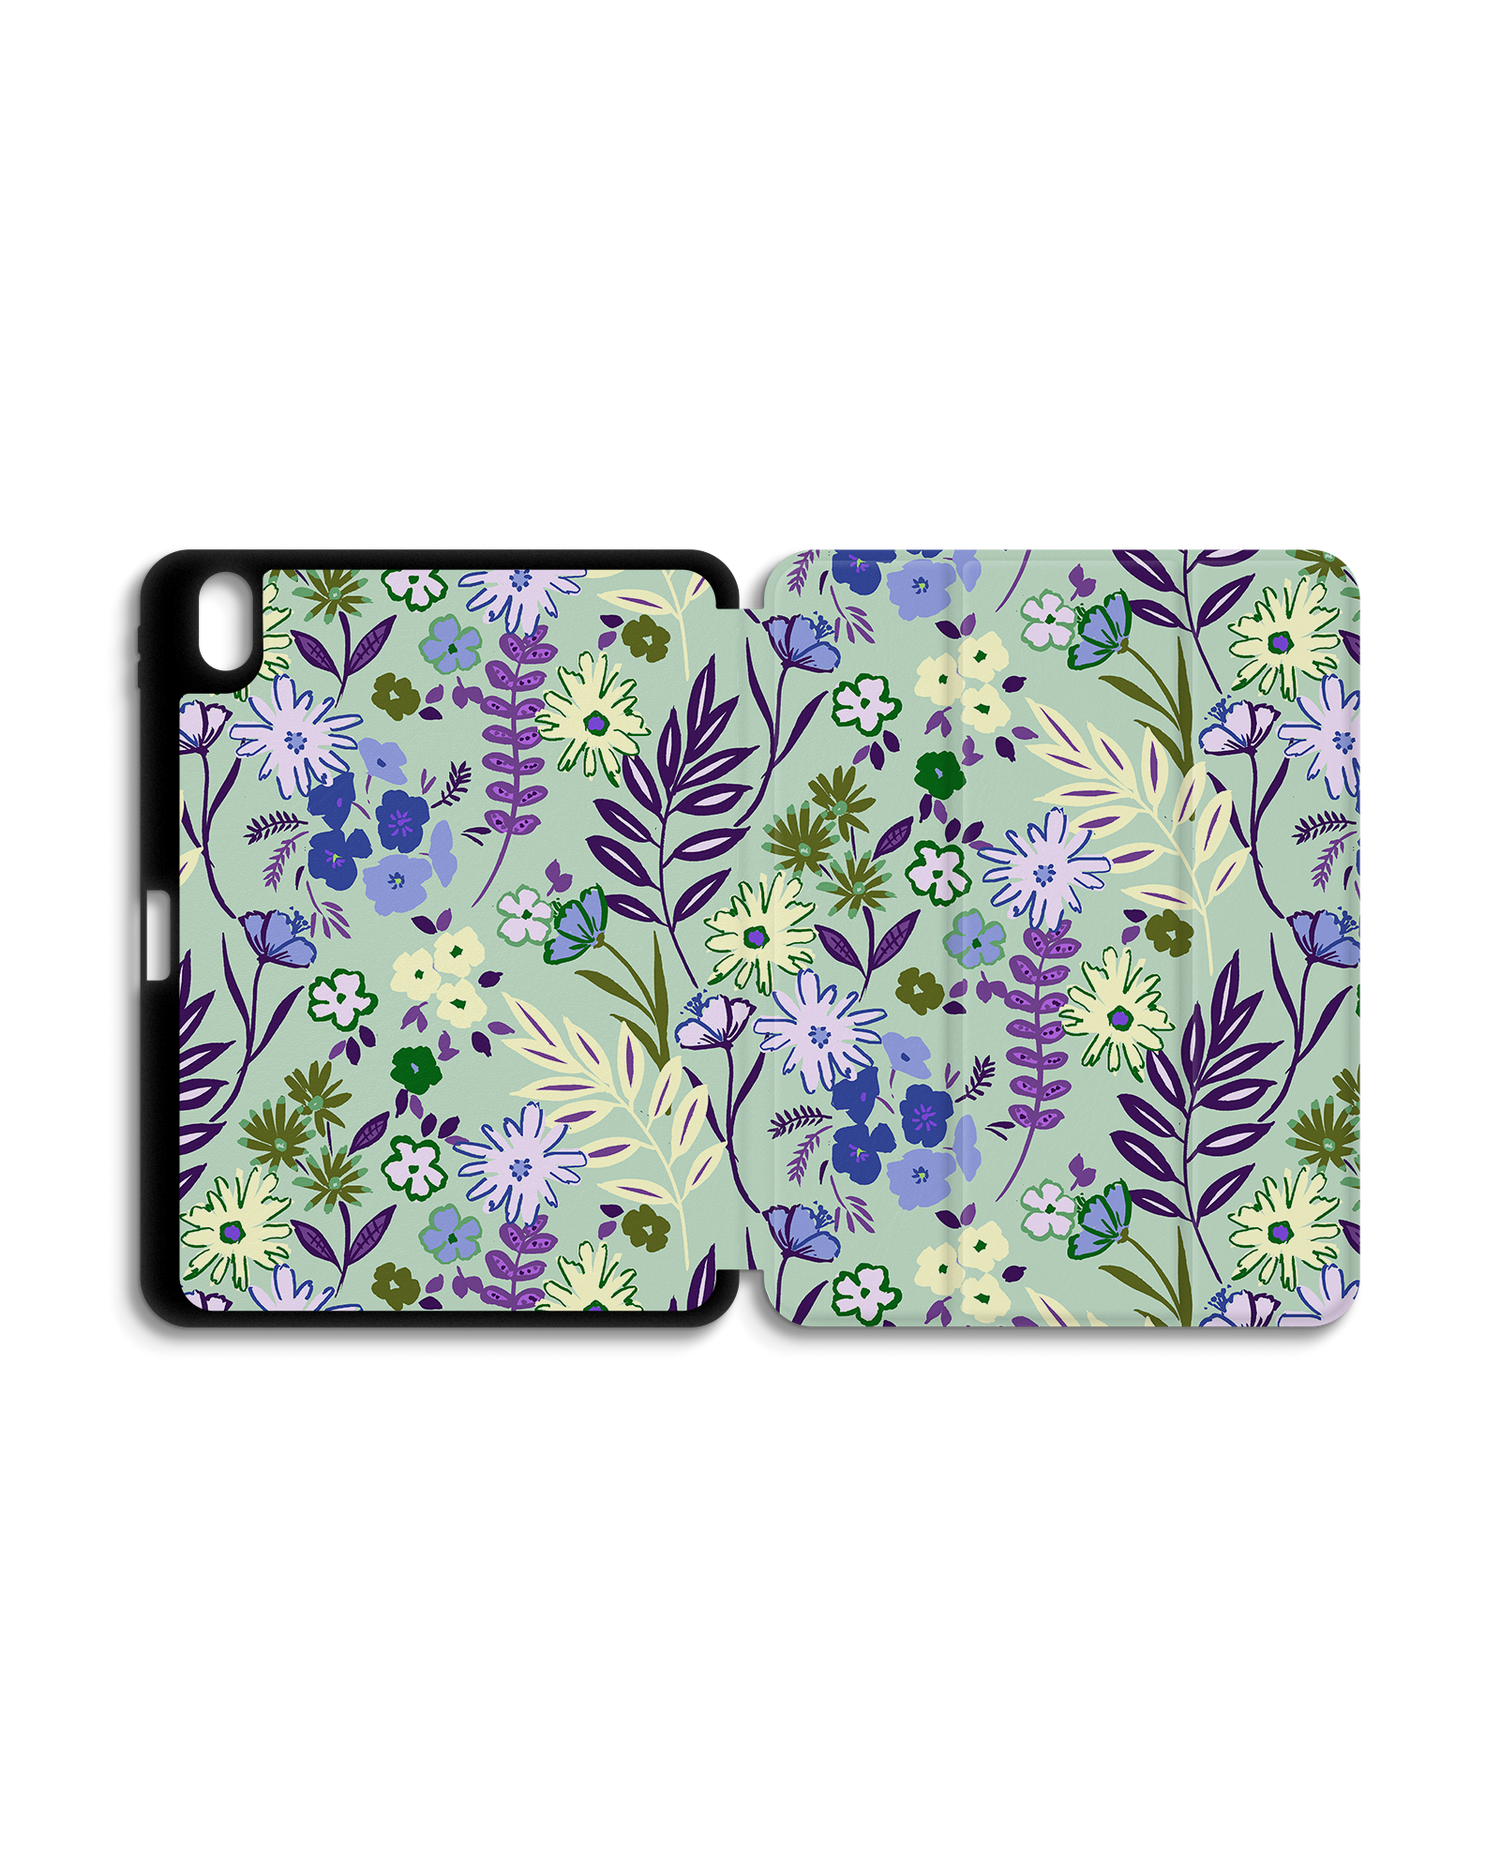 Pretty Purple Flowers iPad Case with Pencil Holder for Apple iPad (10th Generation): Opened exterior view